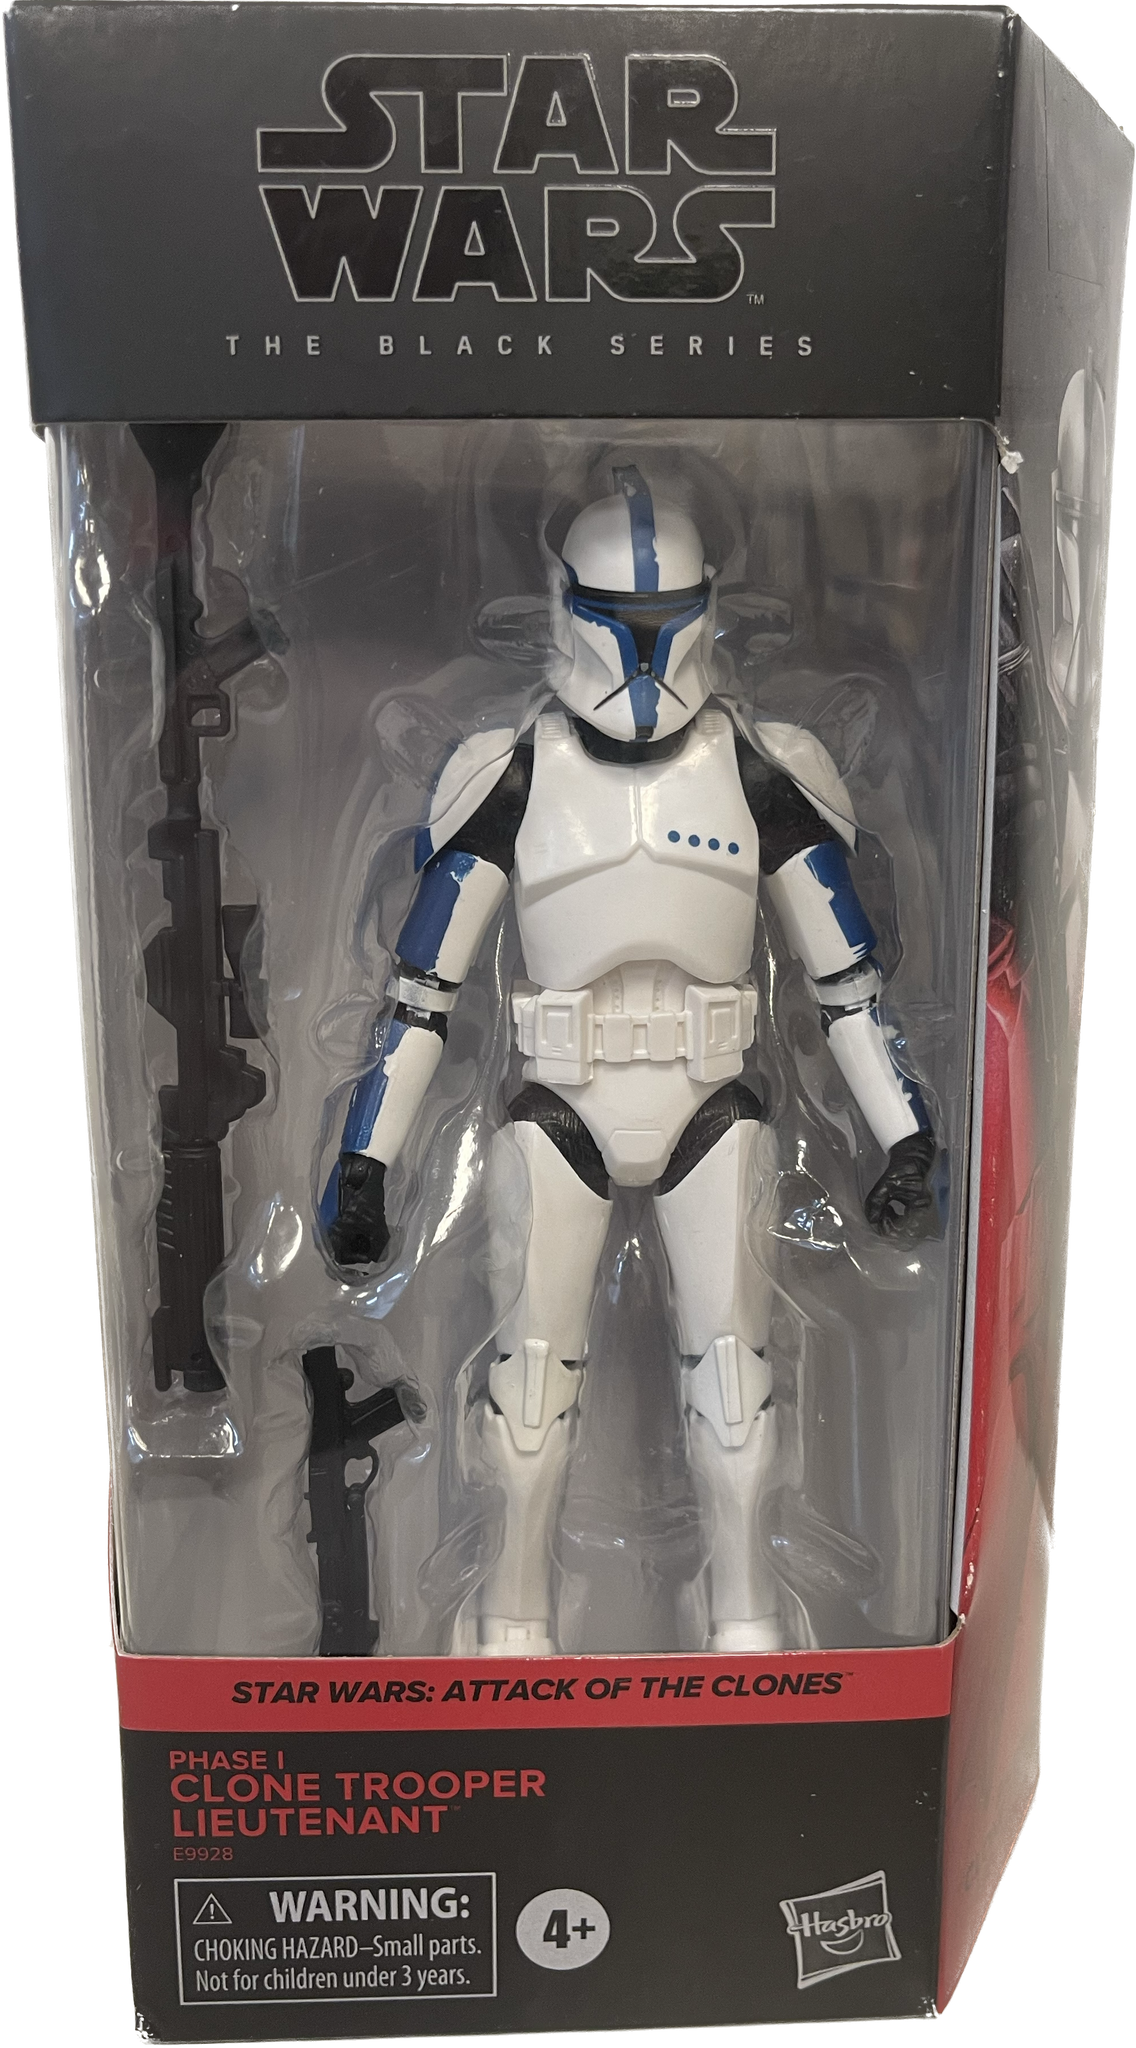 Star Wars The Black Series Attack Of The Clones Phase 1 Clone Trooper Lieutenant